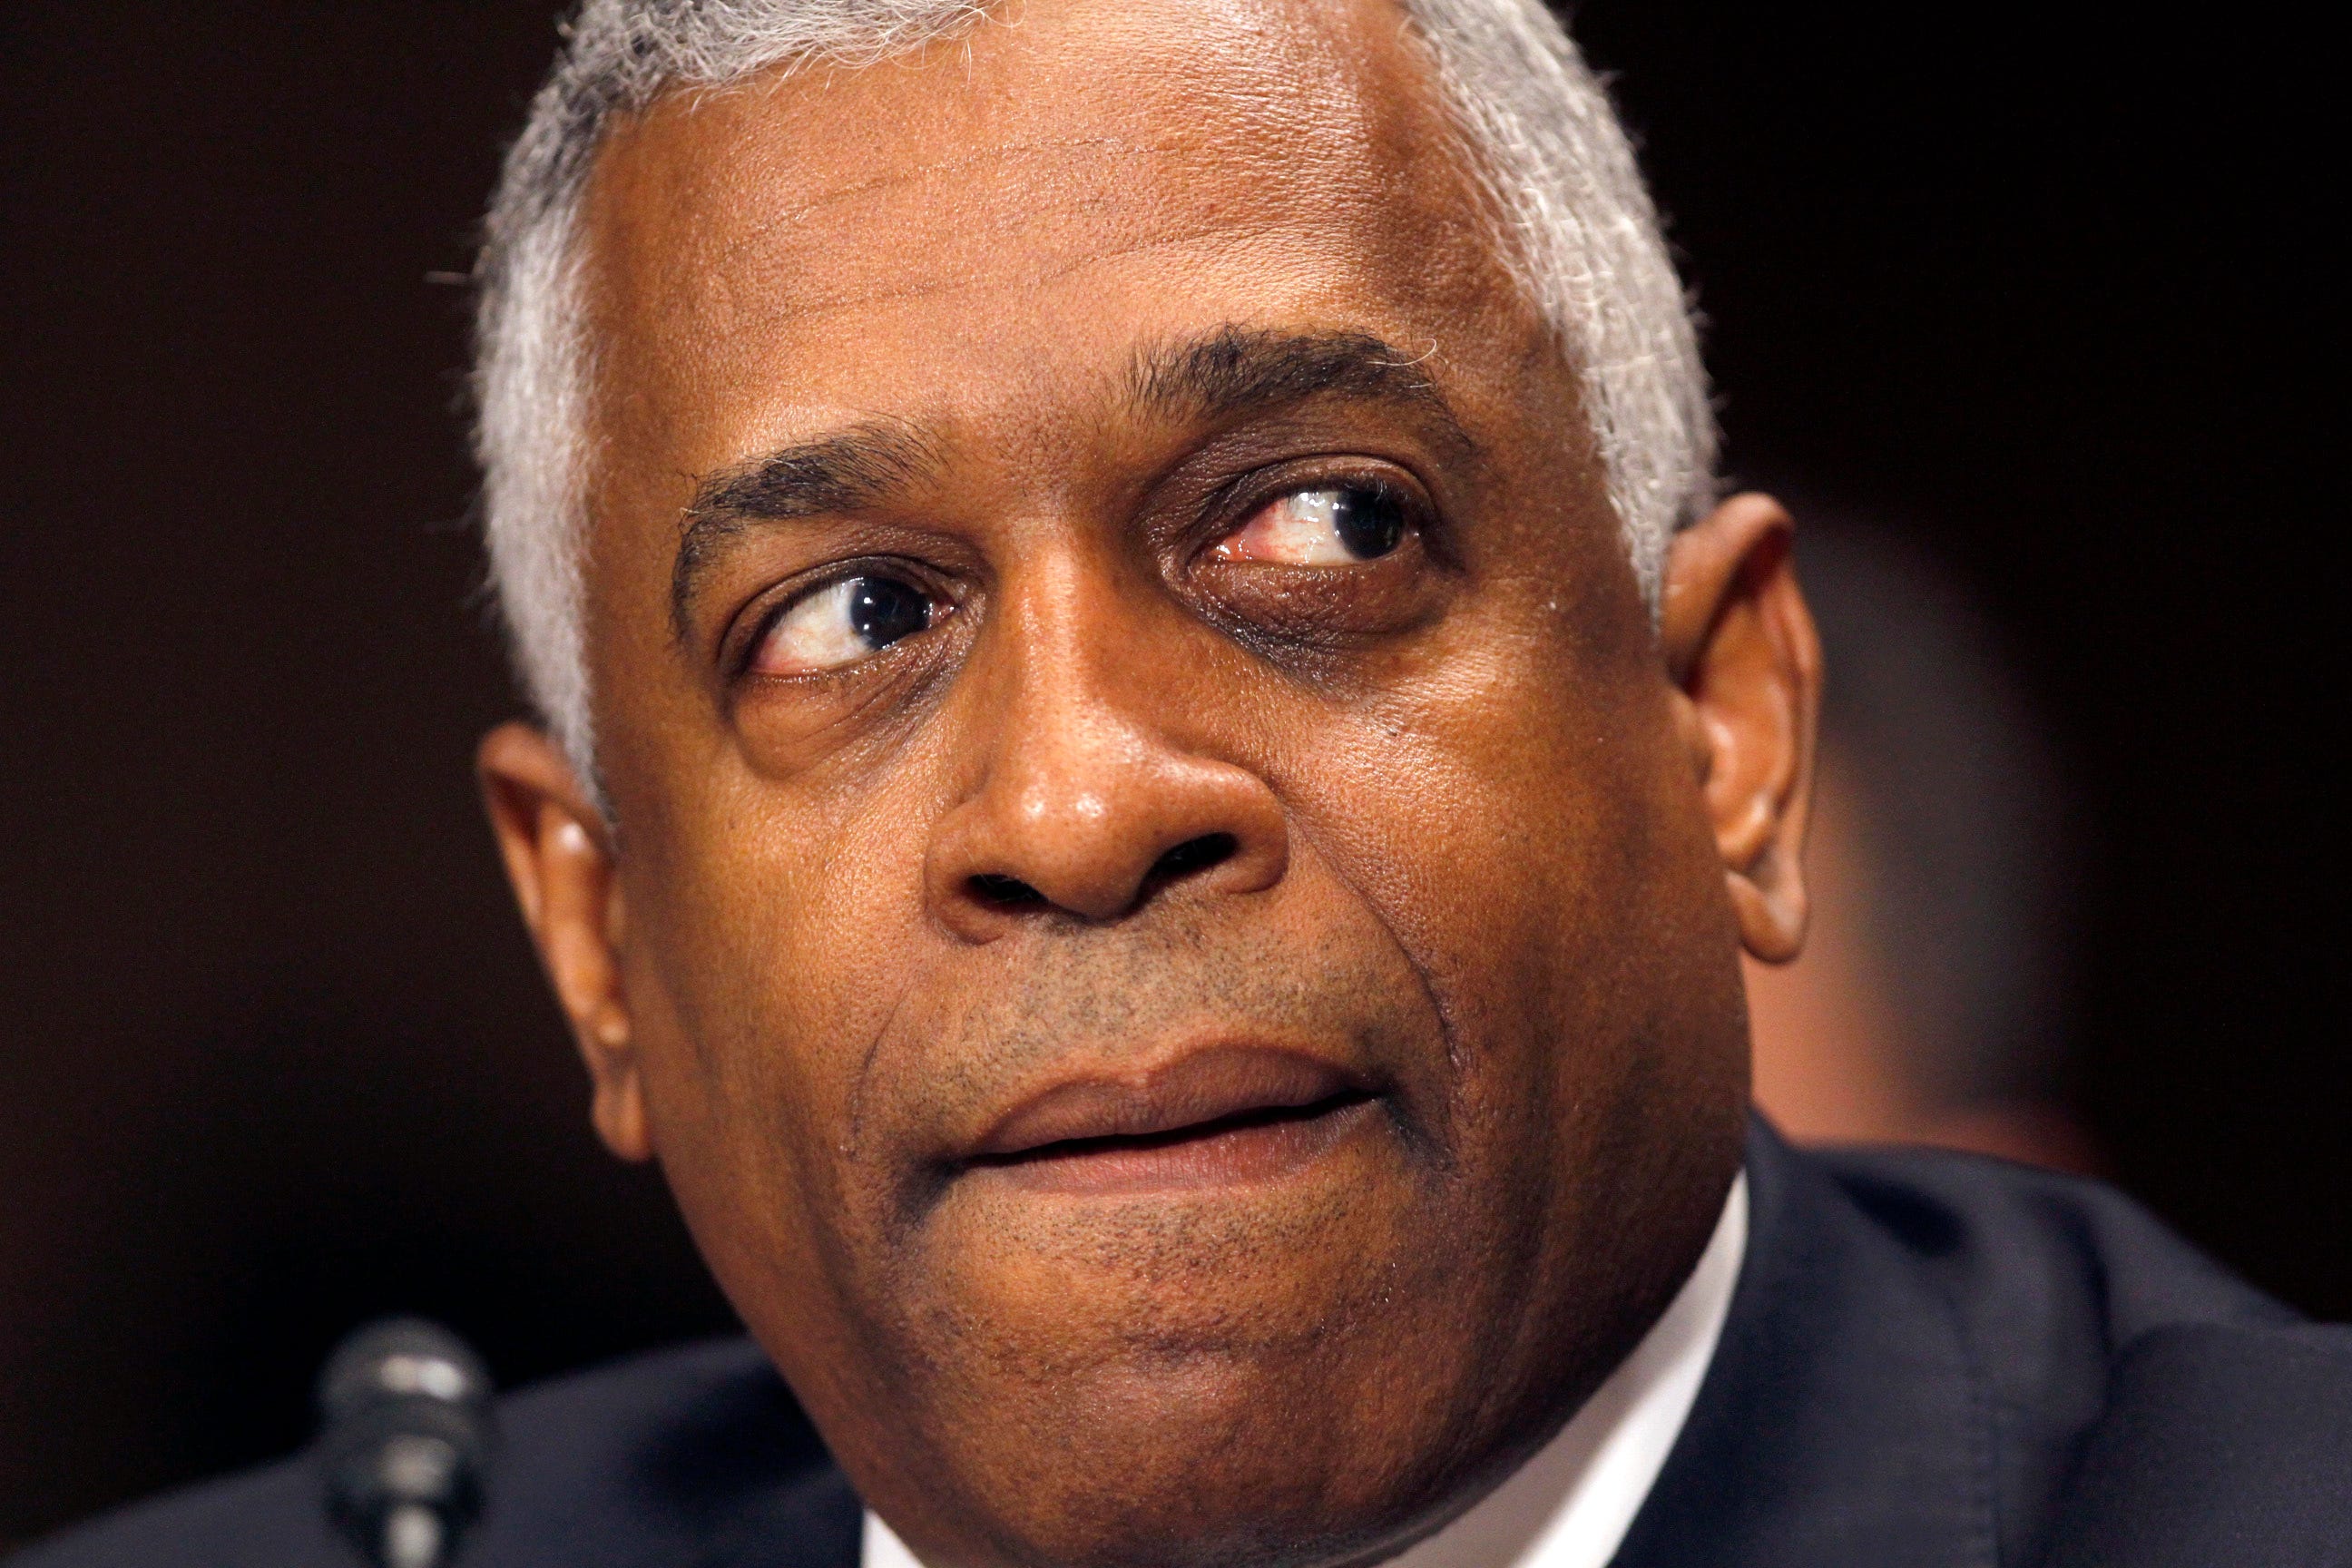 B. Todd Jones served as the ATF’s last Senate-confirmed leader before resigning in 2015.